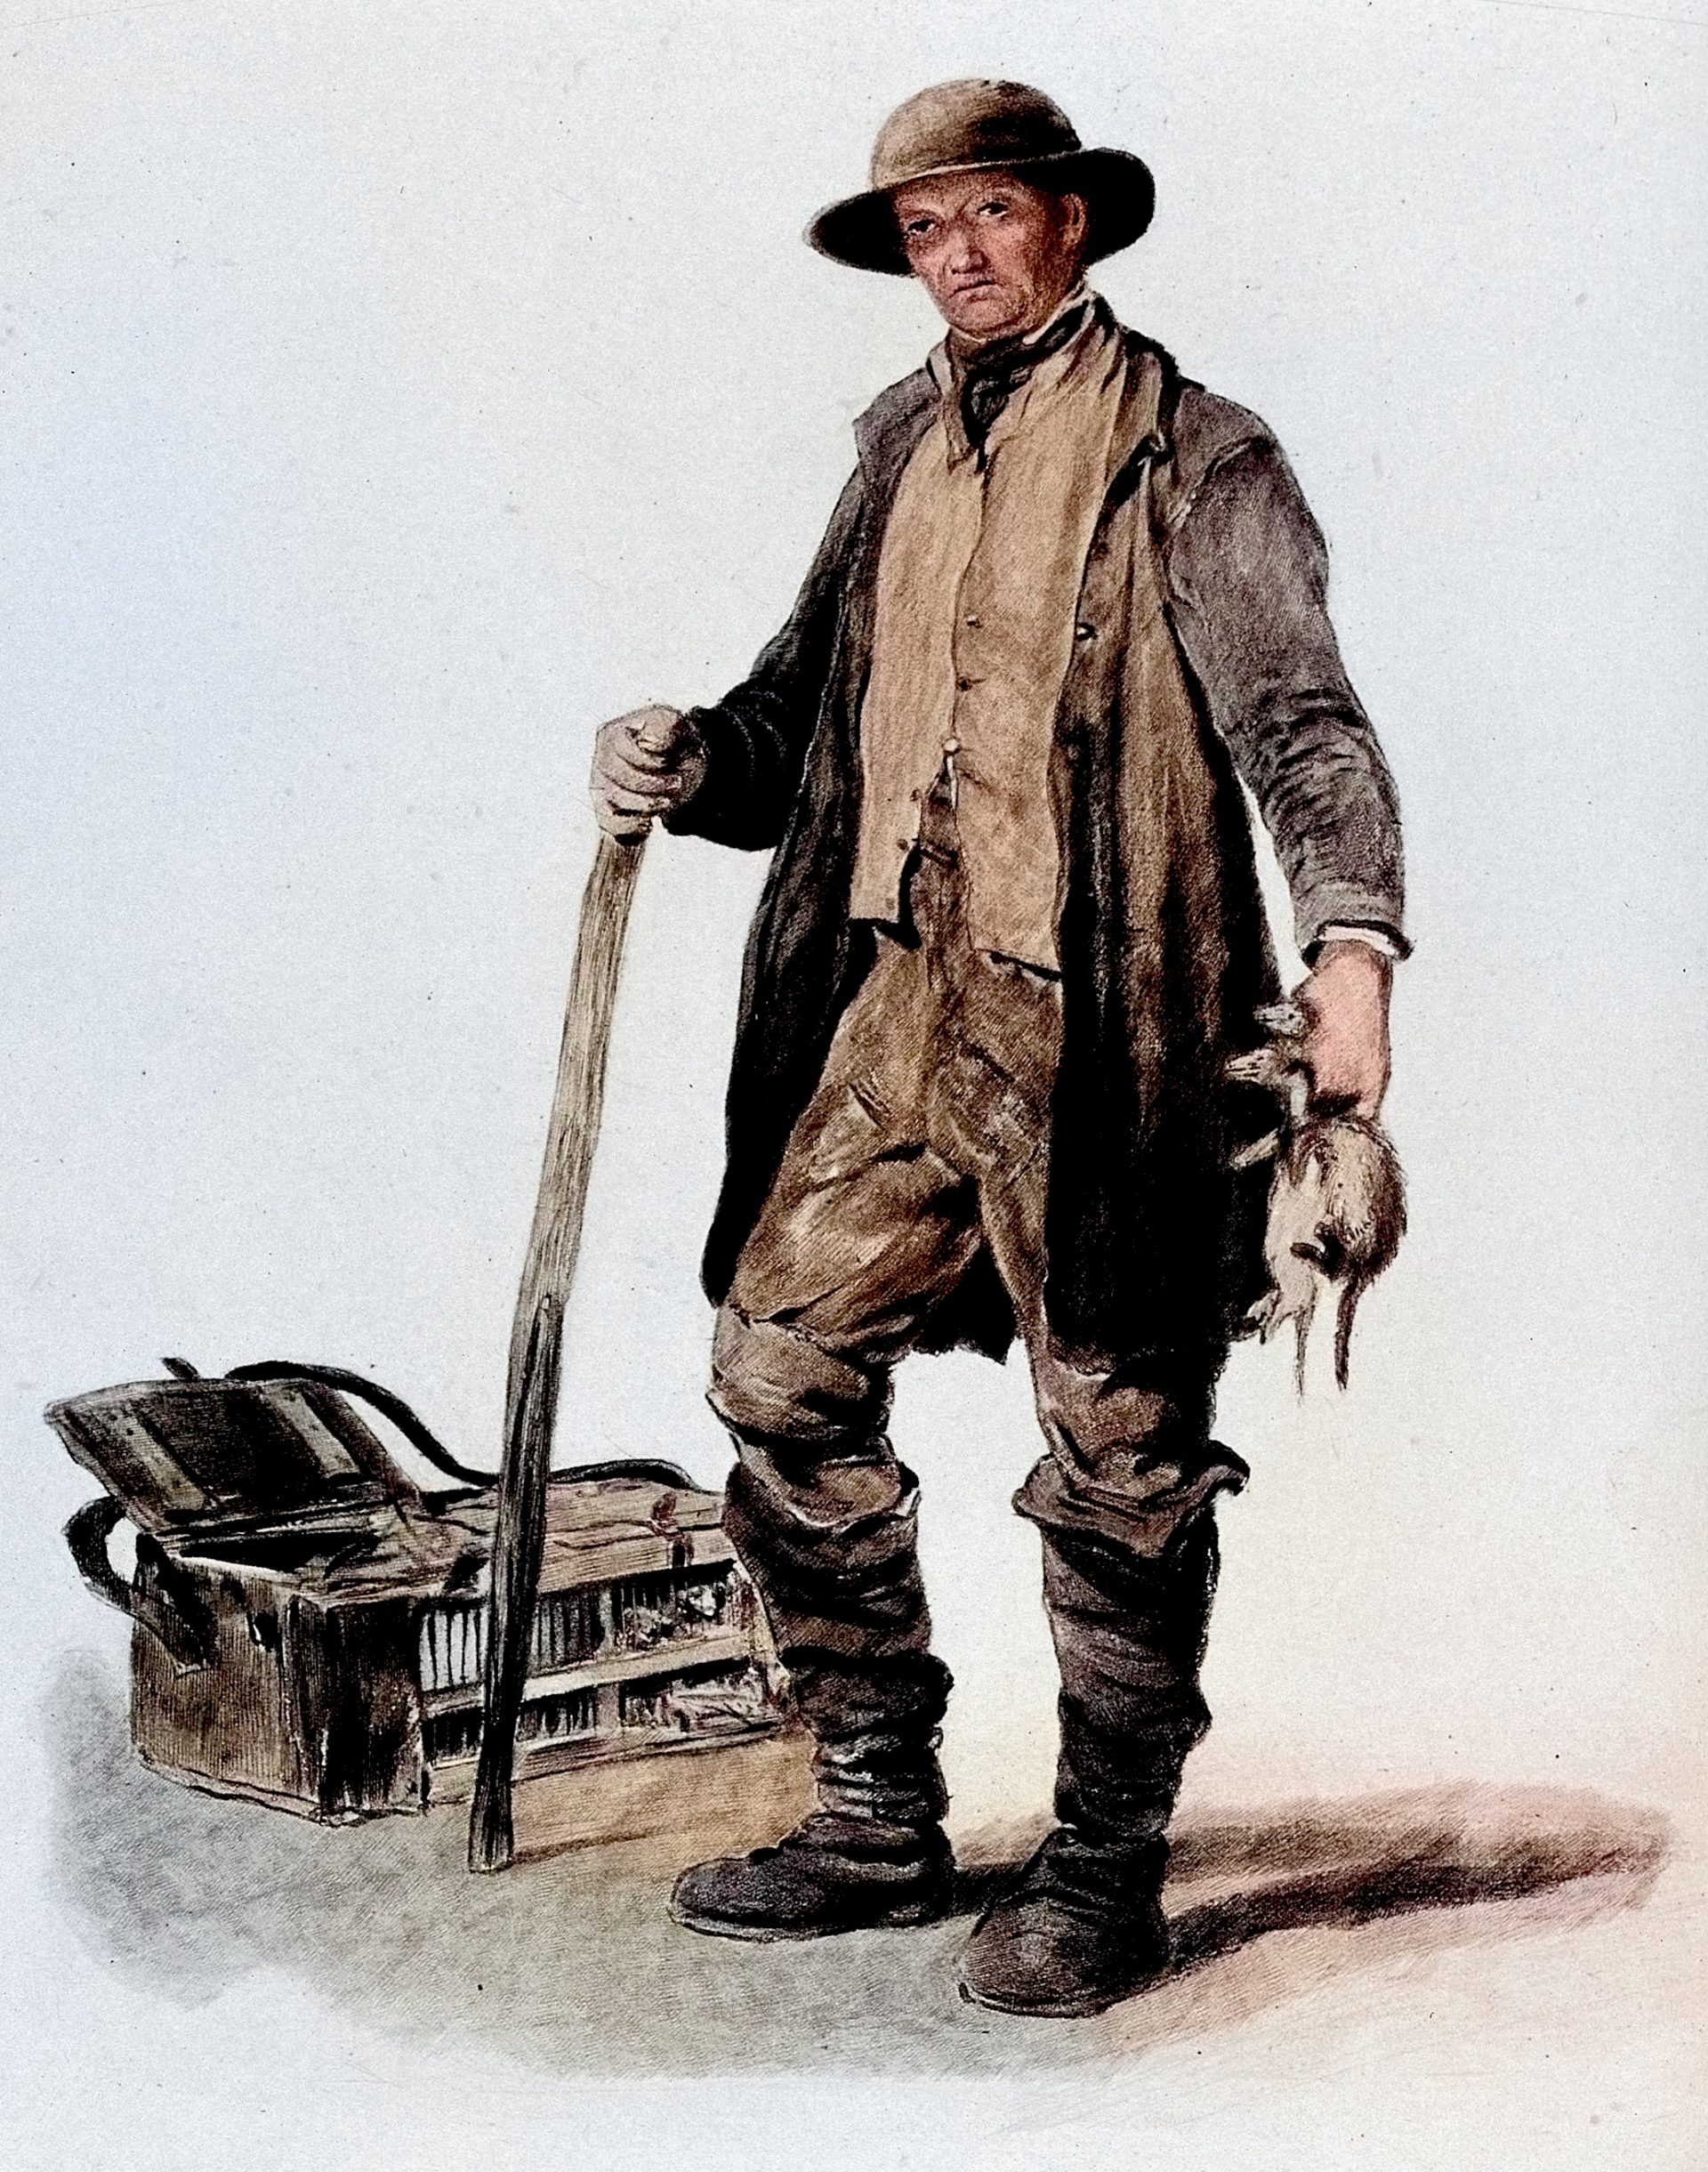 This illustration shows a man in dirty 19th century clothes, holding a large walking stick in one hand and a rat in another. He has a determined look on his face. A rat cage is on the ground next to him.